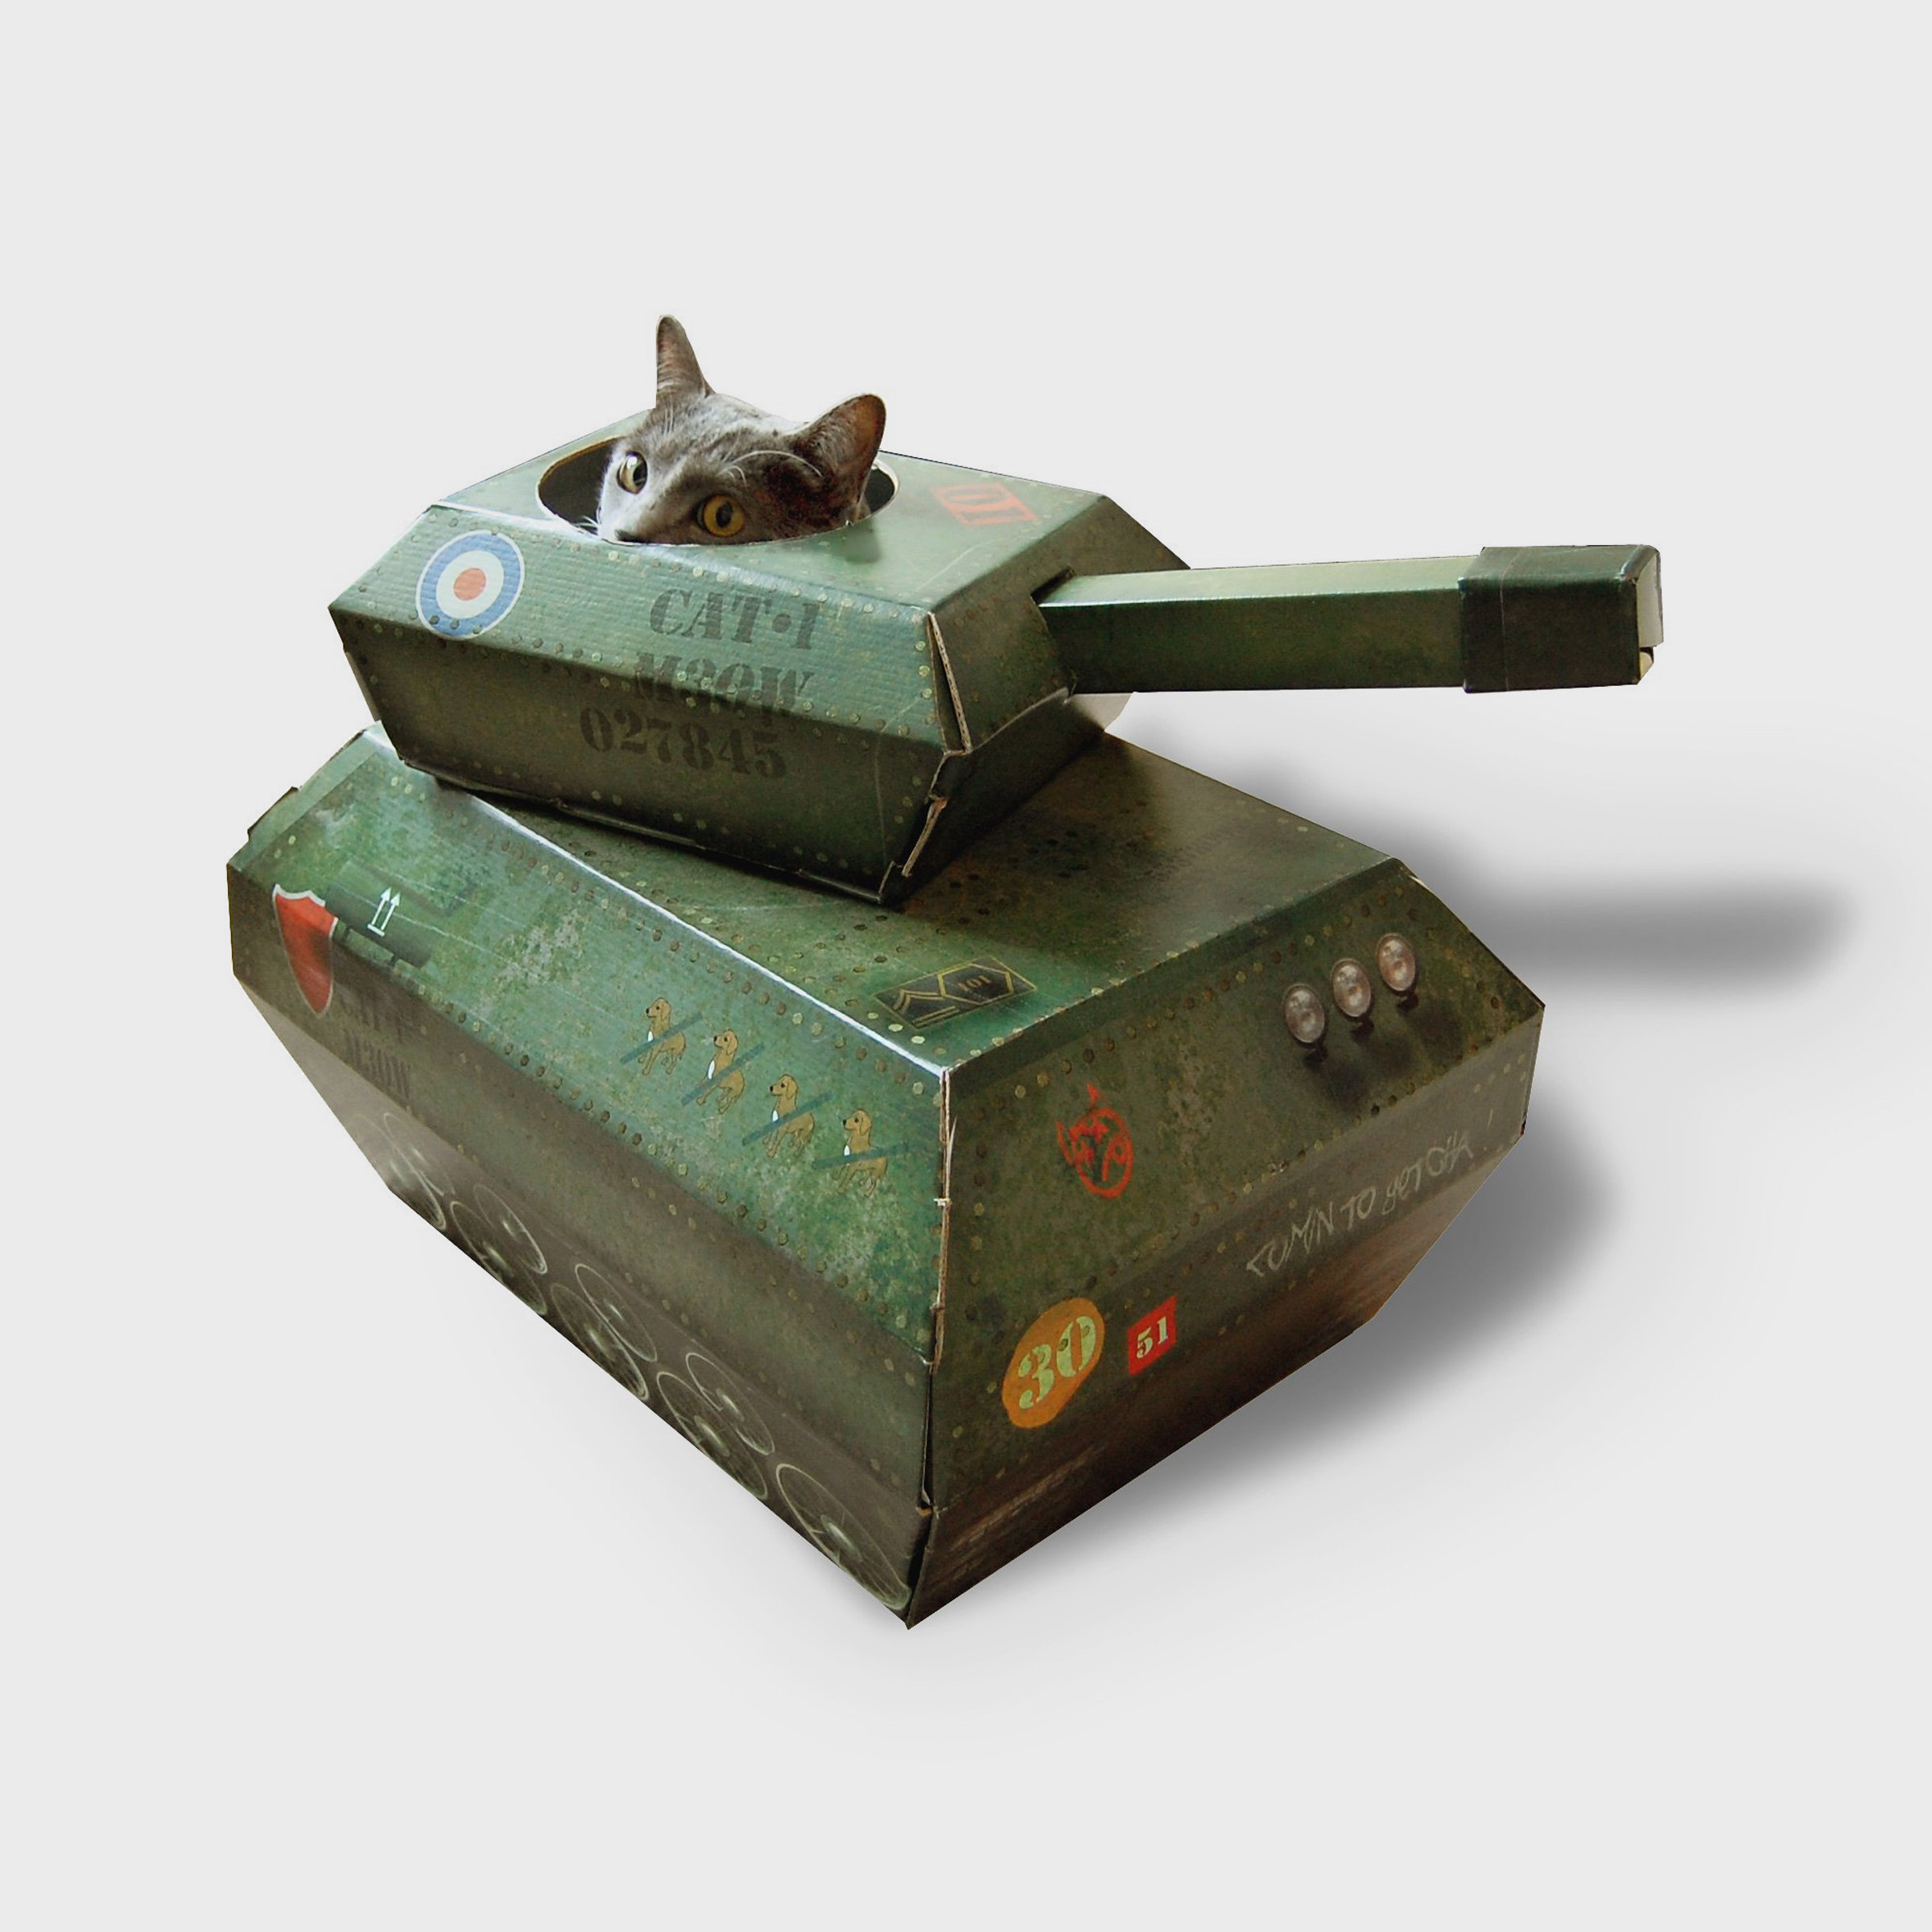 Cardboard Tank for Cats